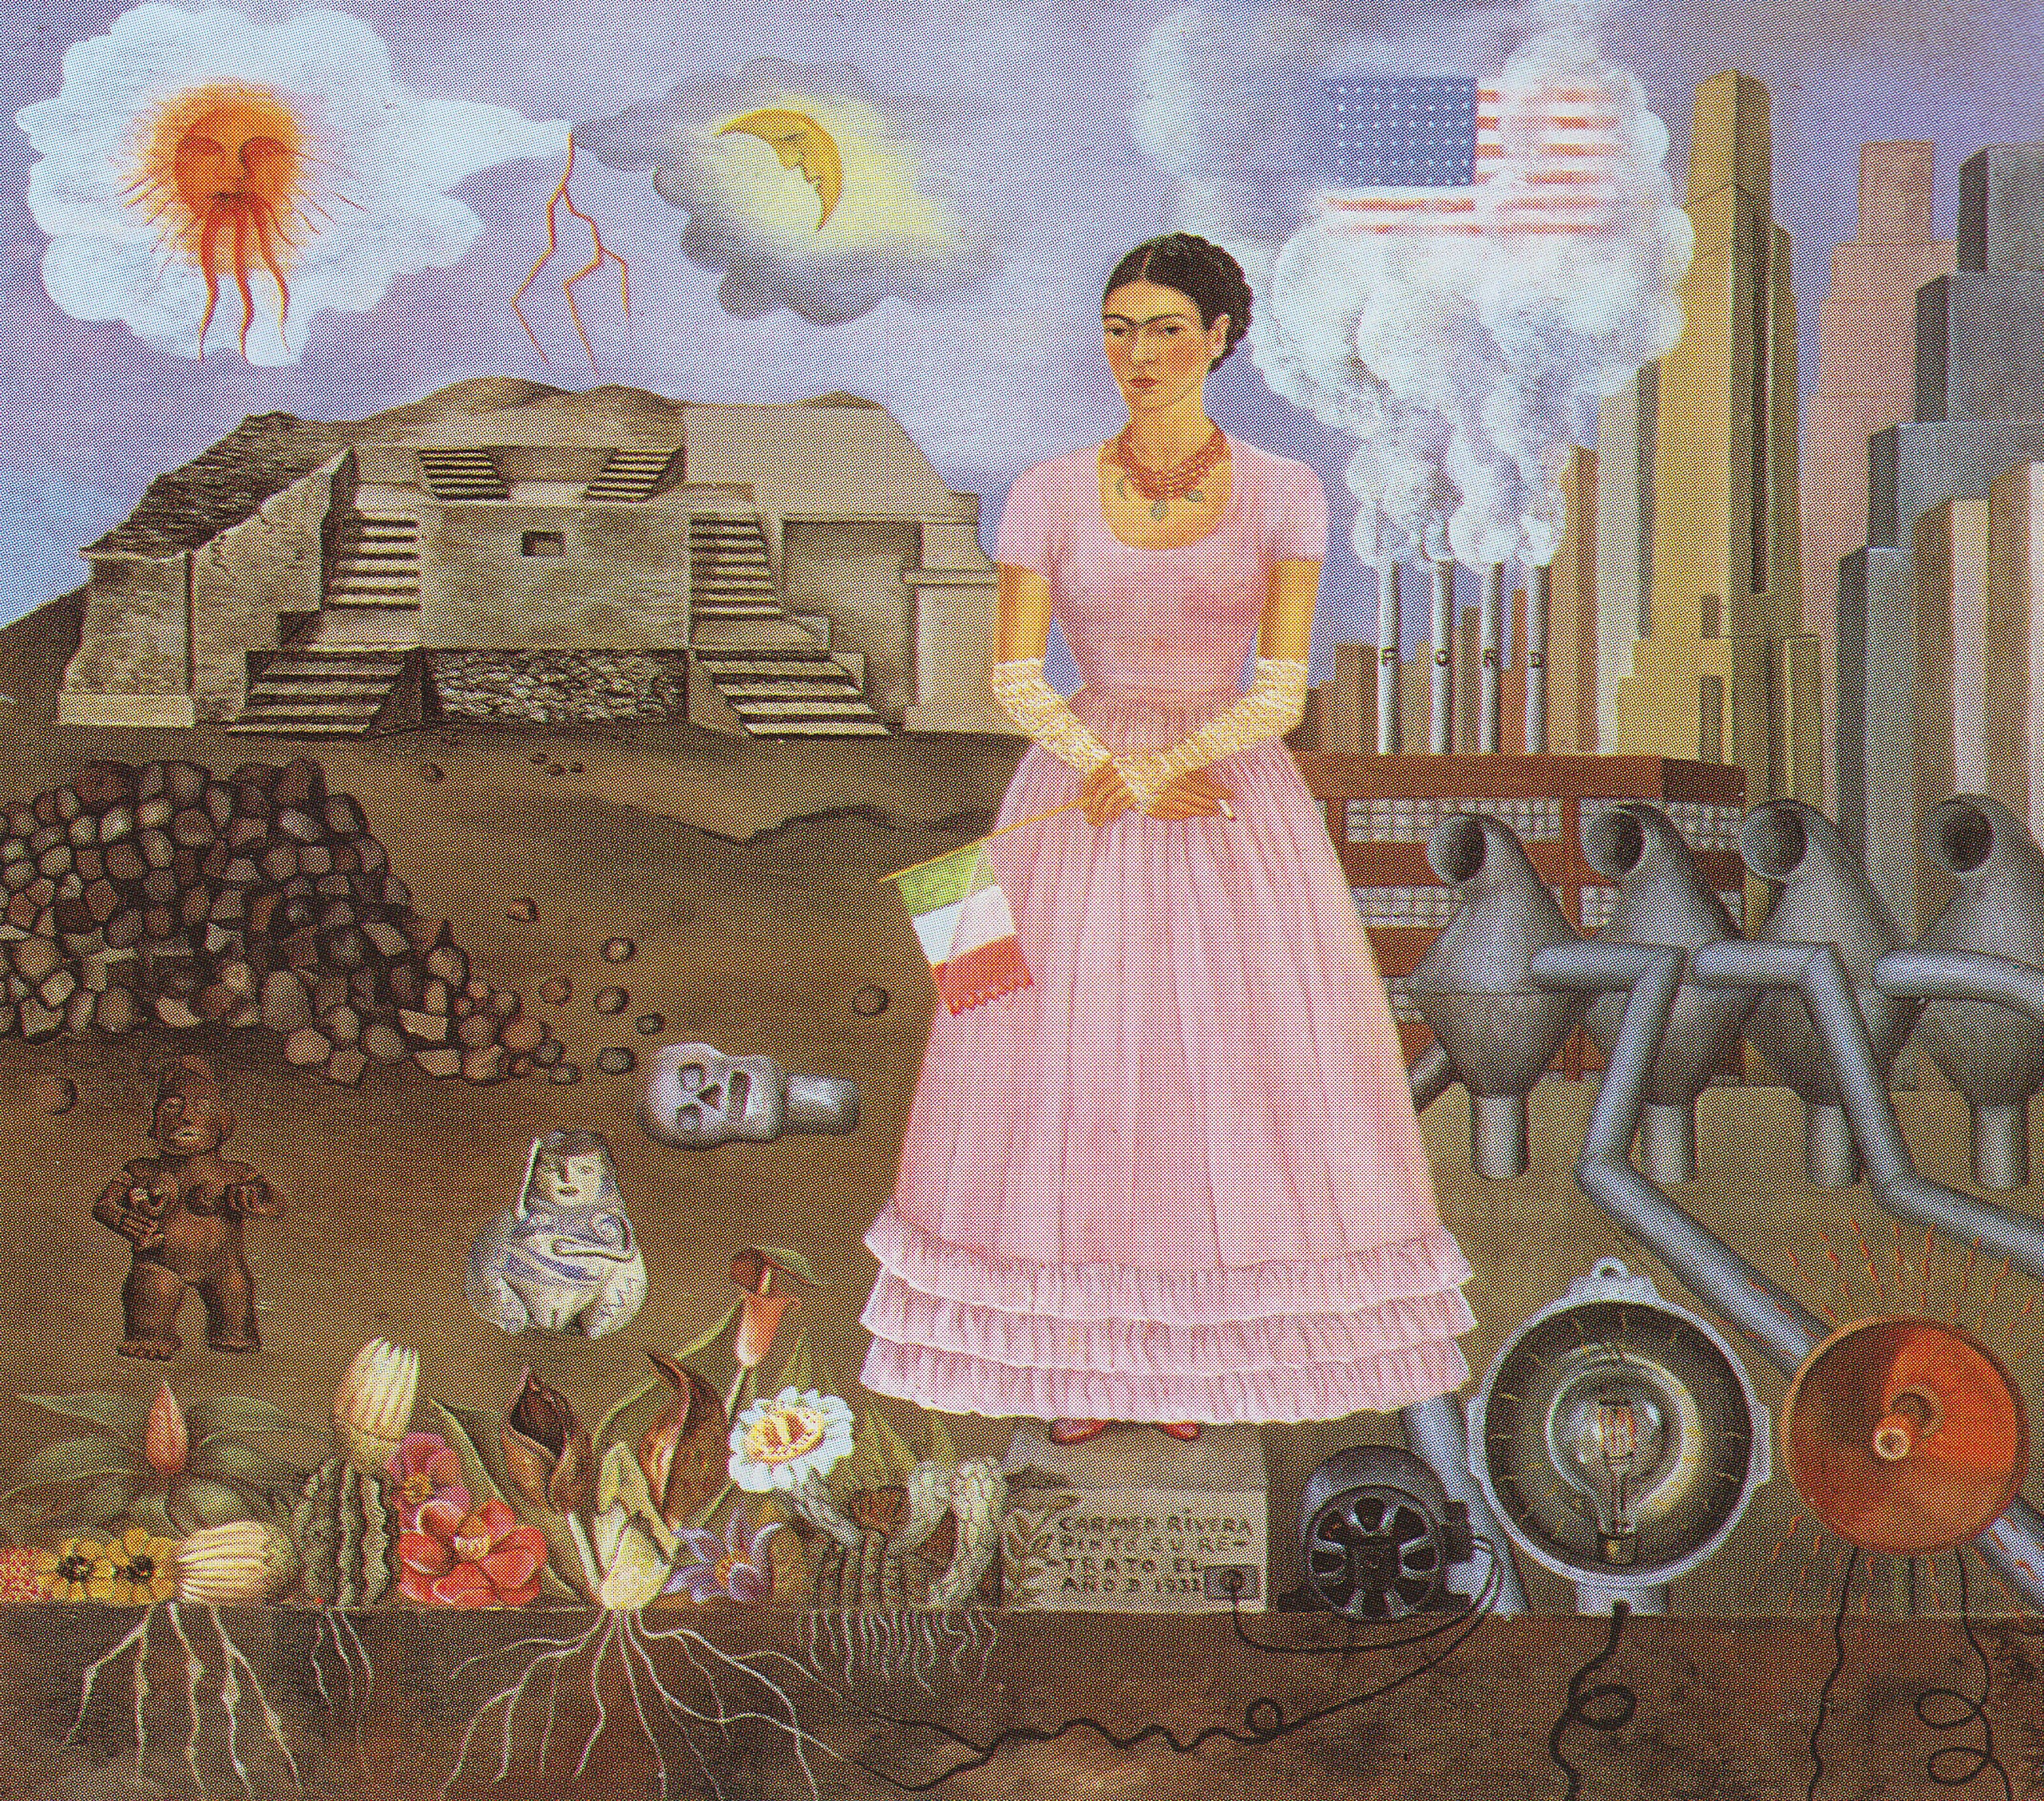 “Self-Portrait on the Borderline of United States and Mexico,” Frieda Kahlo